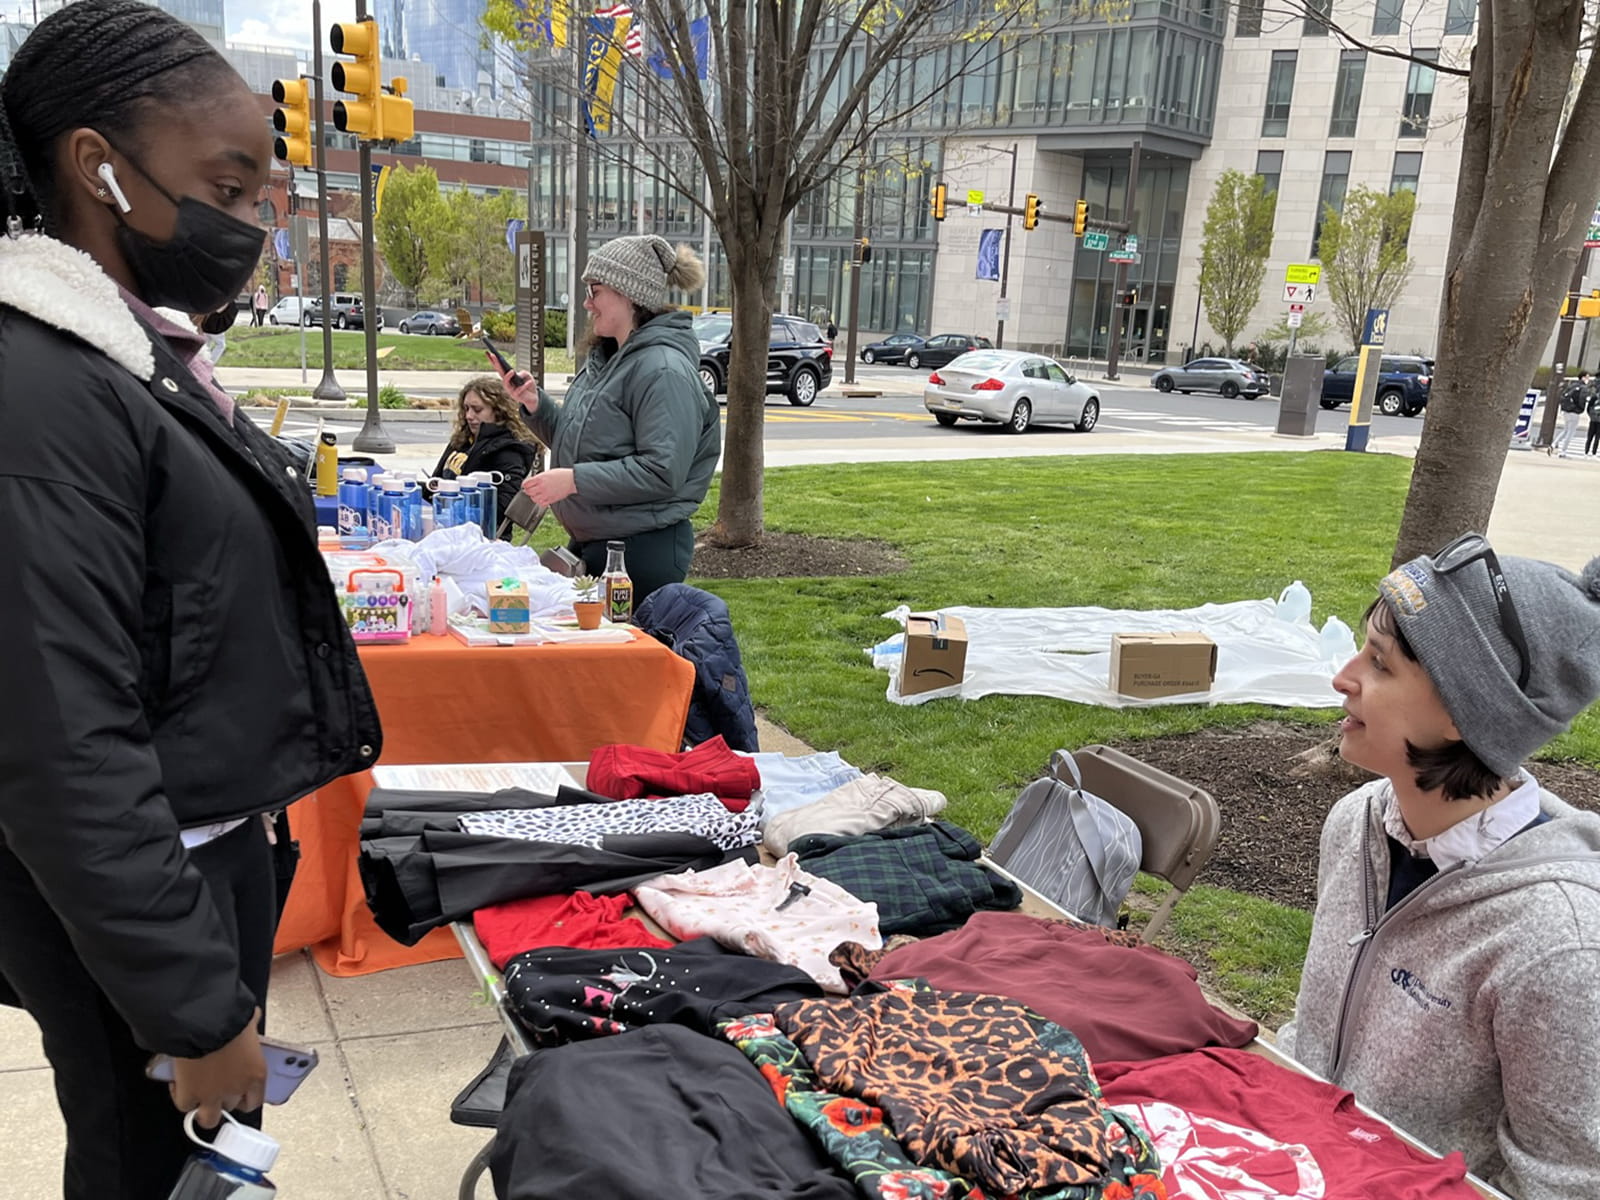 On Lancaster Walk, a person attending EarthFest speaks to someone seated at a table with clothing. 